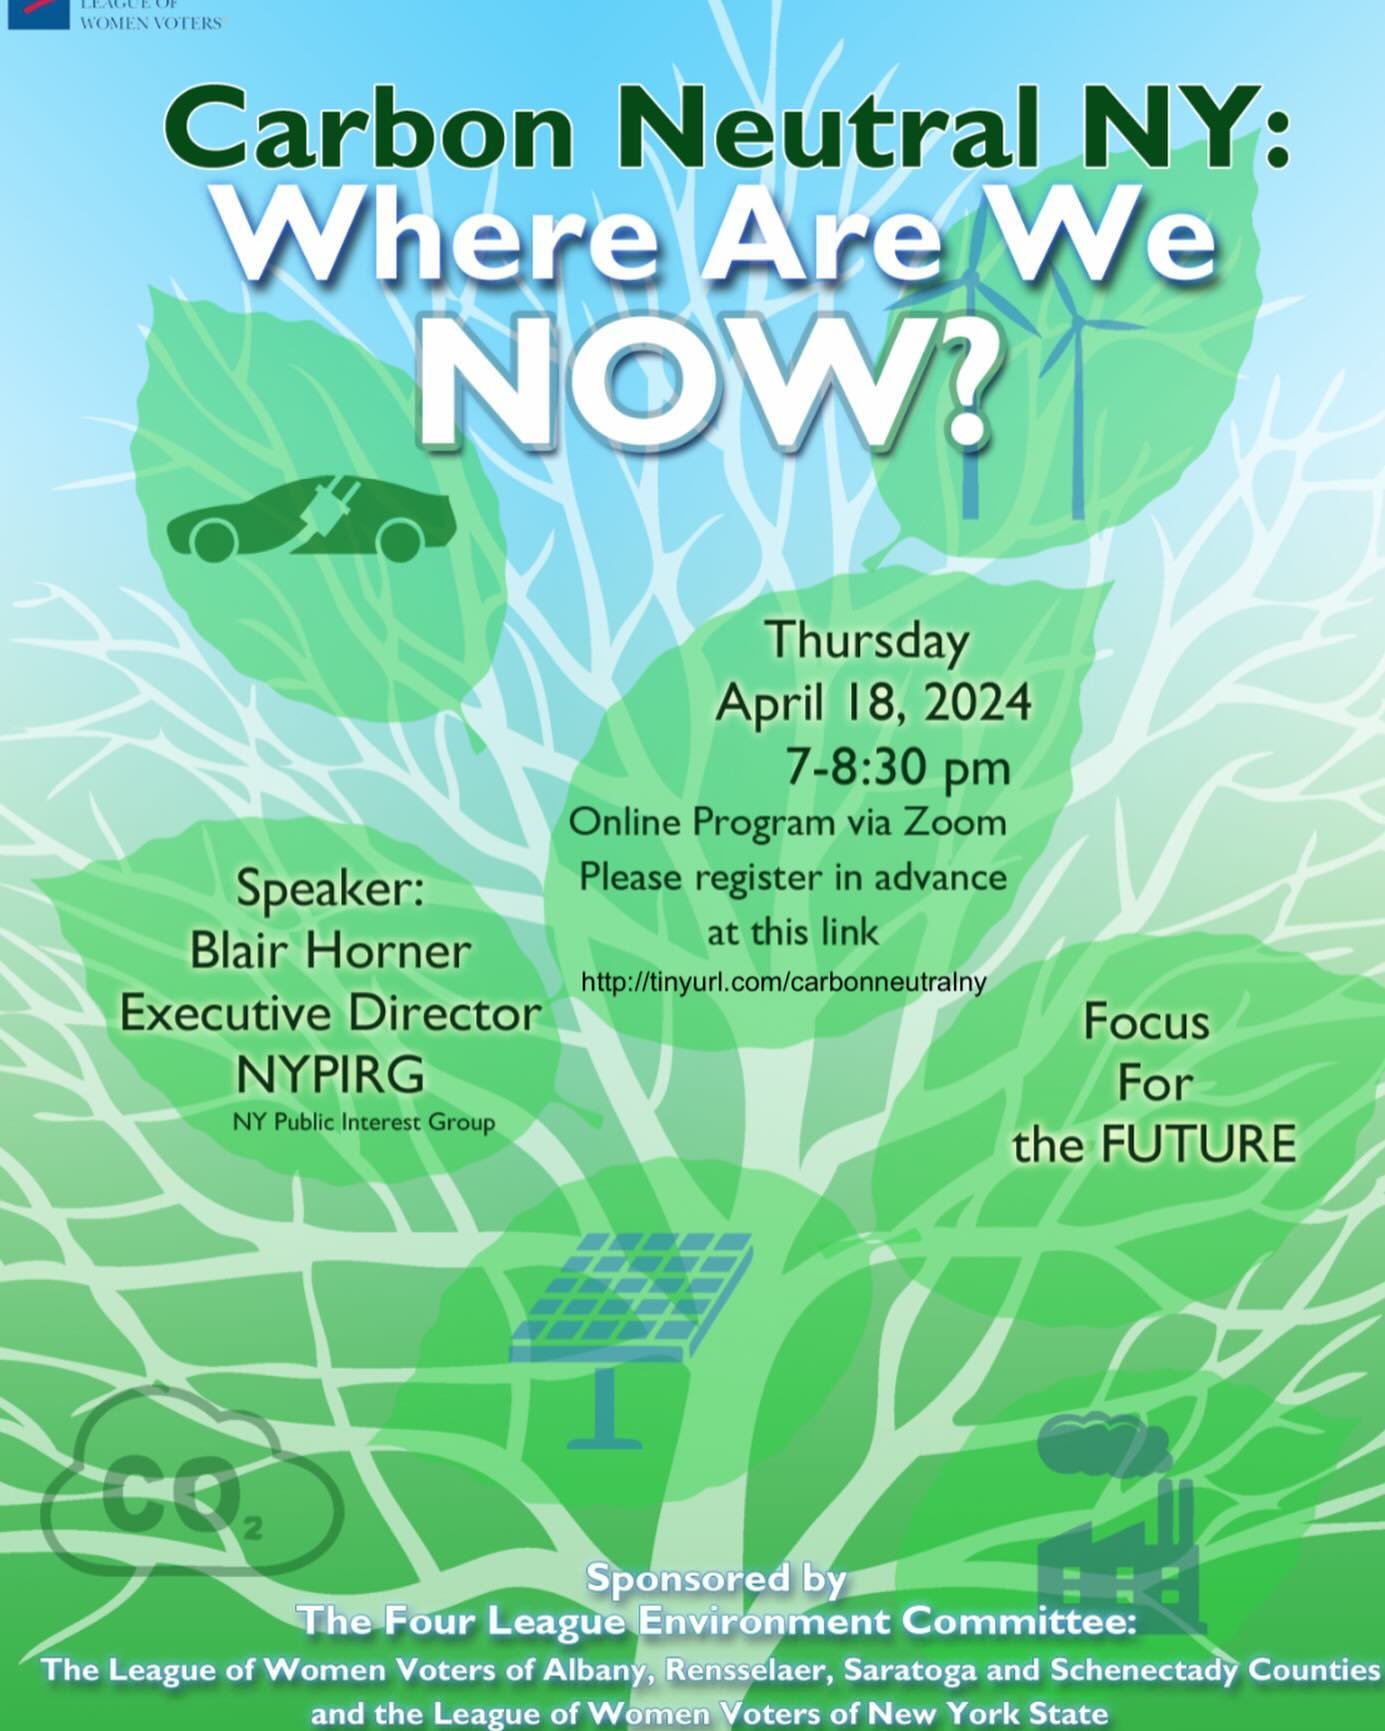 Join us on Thursday, April 18th at 7pm for our special online program &ldquo;Carbon Neutral NY: Where Are We Now?&rdquo; This event is sponsored by the Four League Environment Committee of The League of Women Voters of Albany, Rensselaer, Saratoga, a